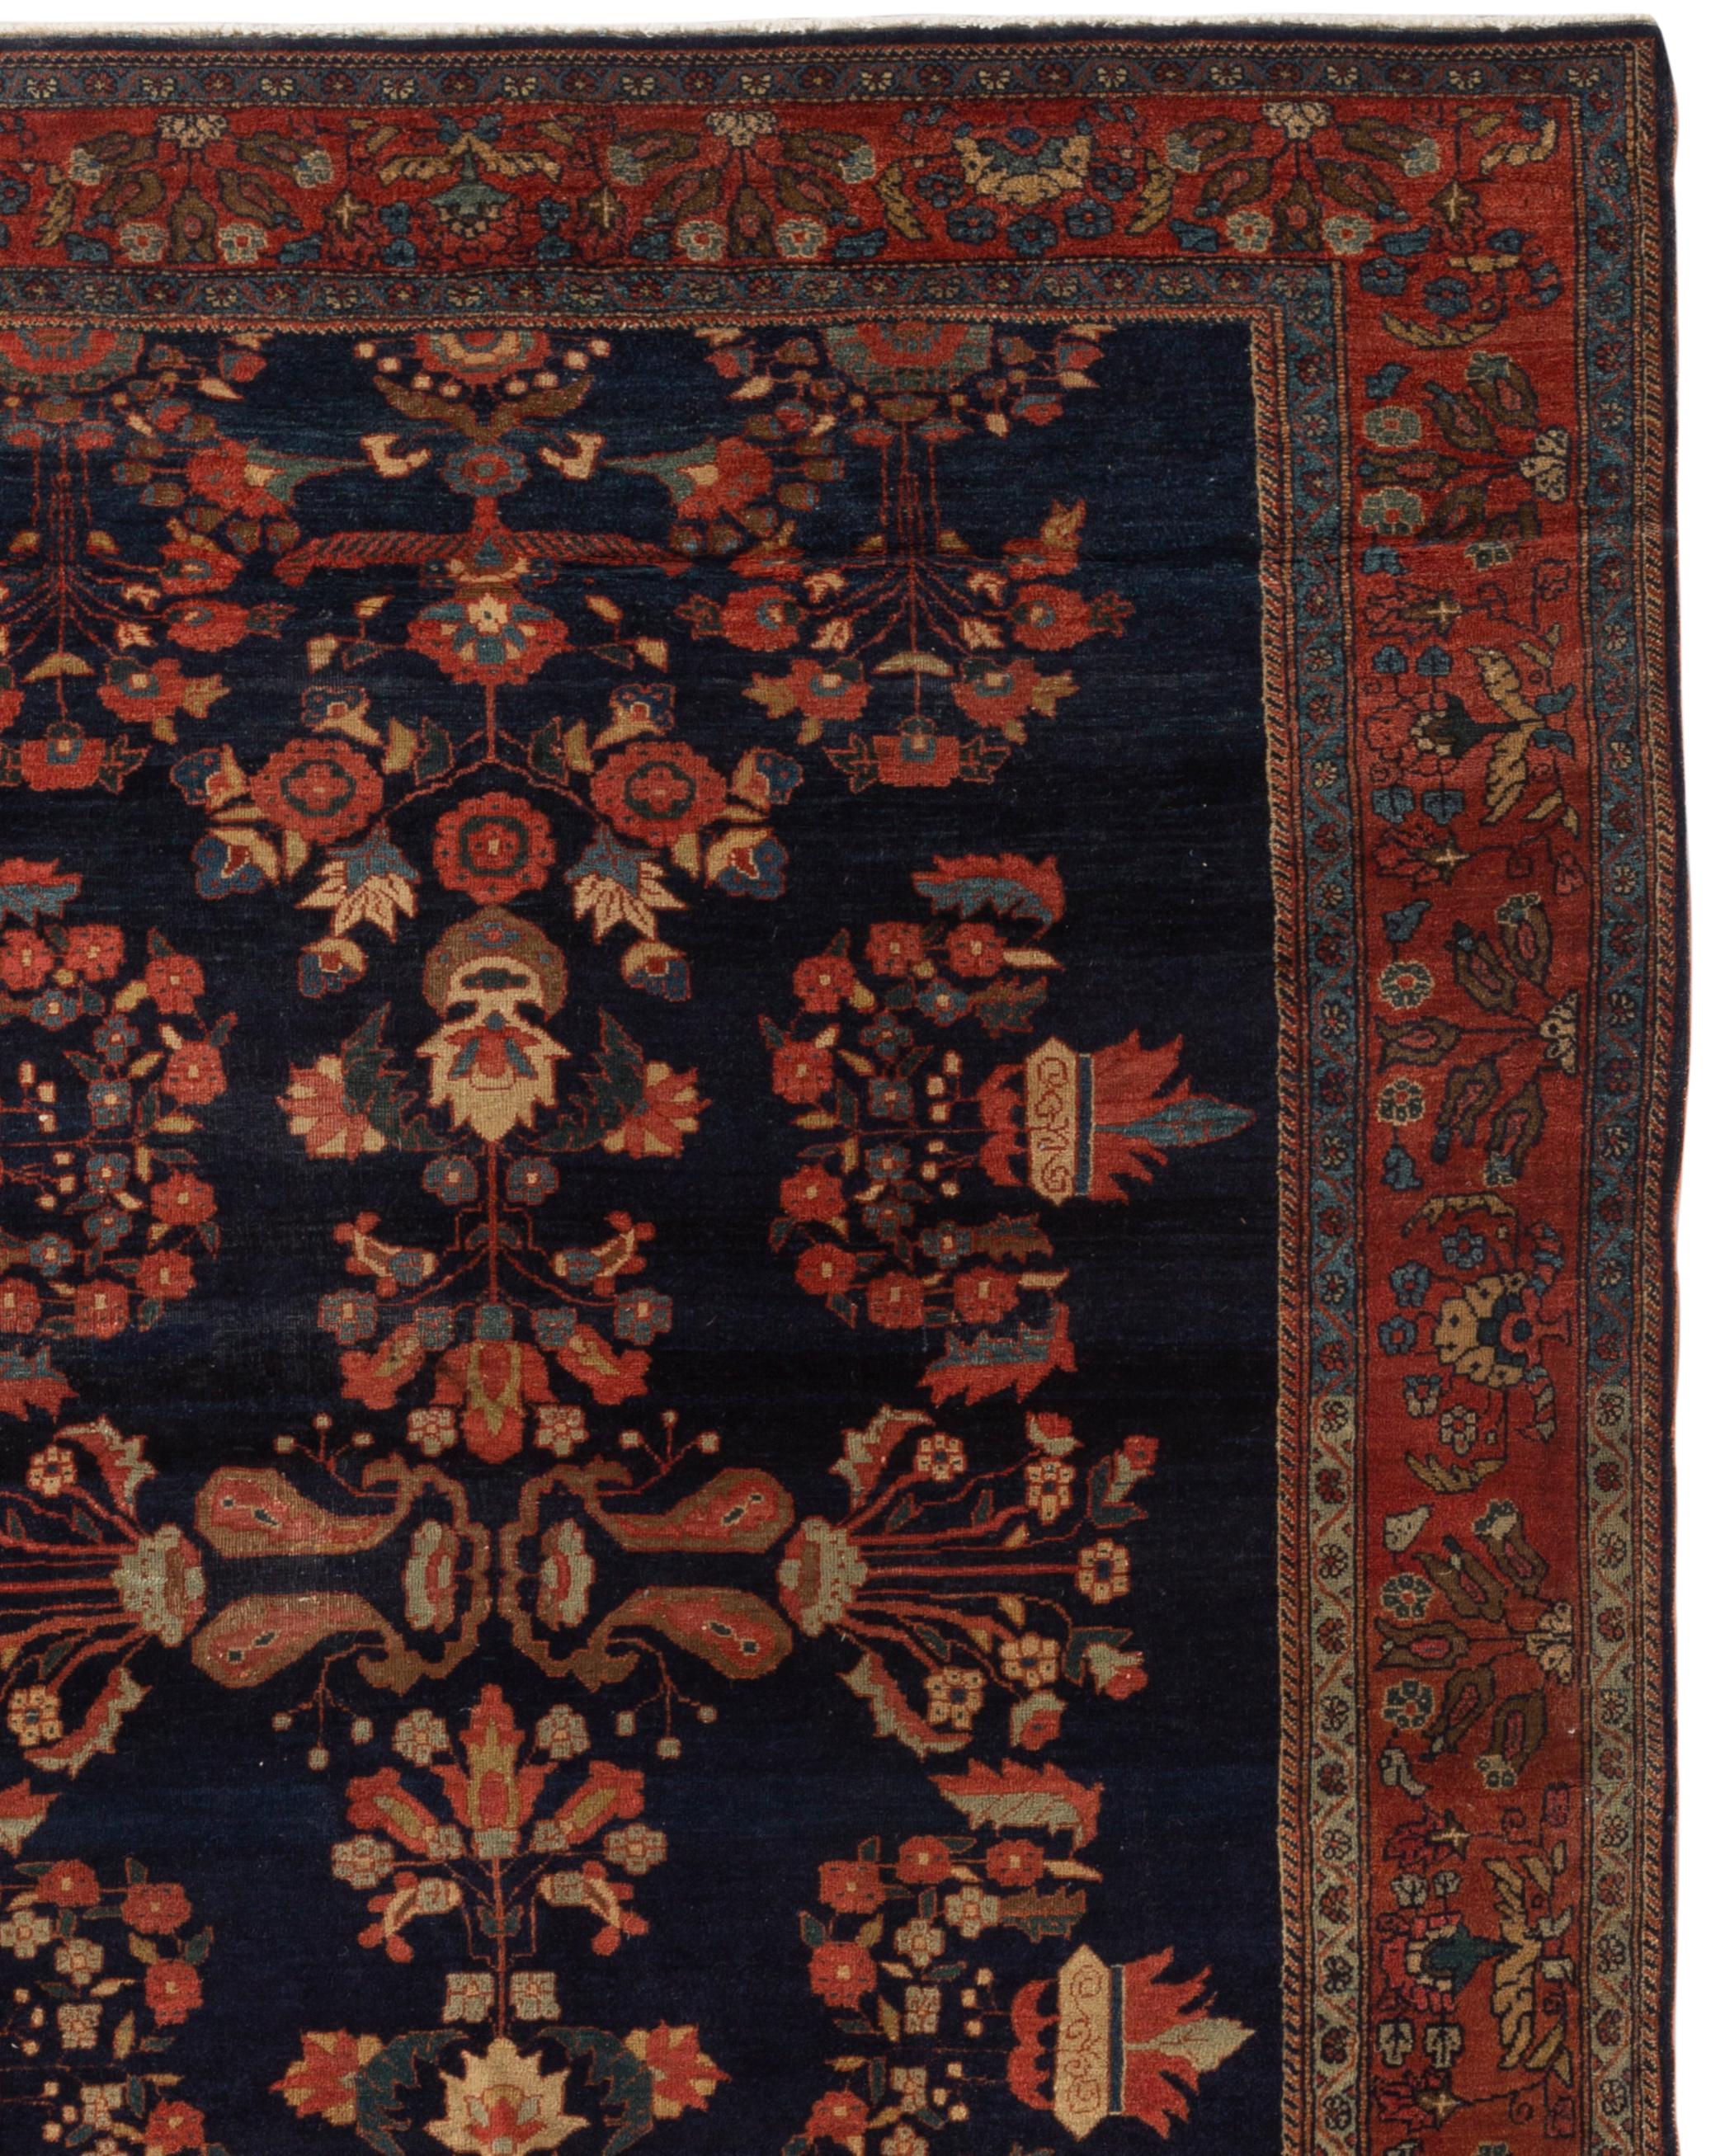 Antique Mahajiran Sarouk rug, circa 1900. Sarouk rugs come from west central Persia and the term Mahajiran signifies that the rug is especially fine both in the quality of the wool used and the weaving. Size: 4'2 x 6'6.